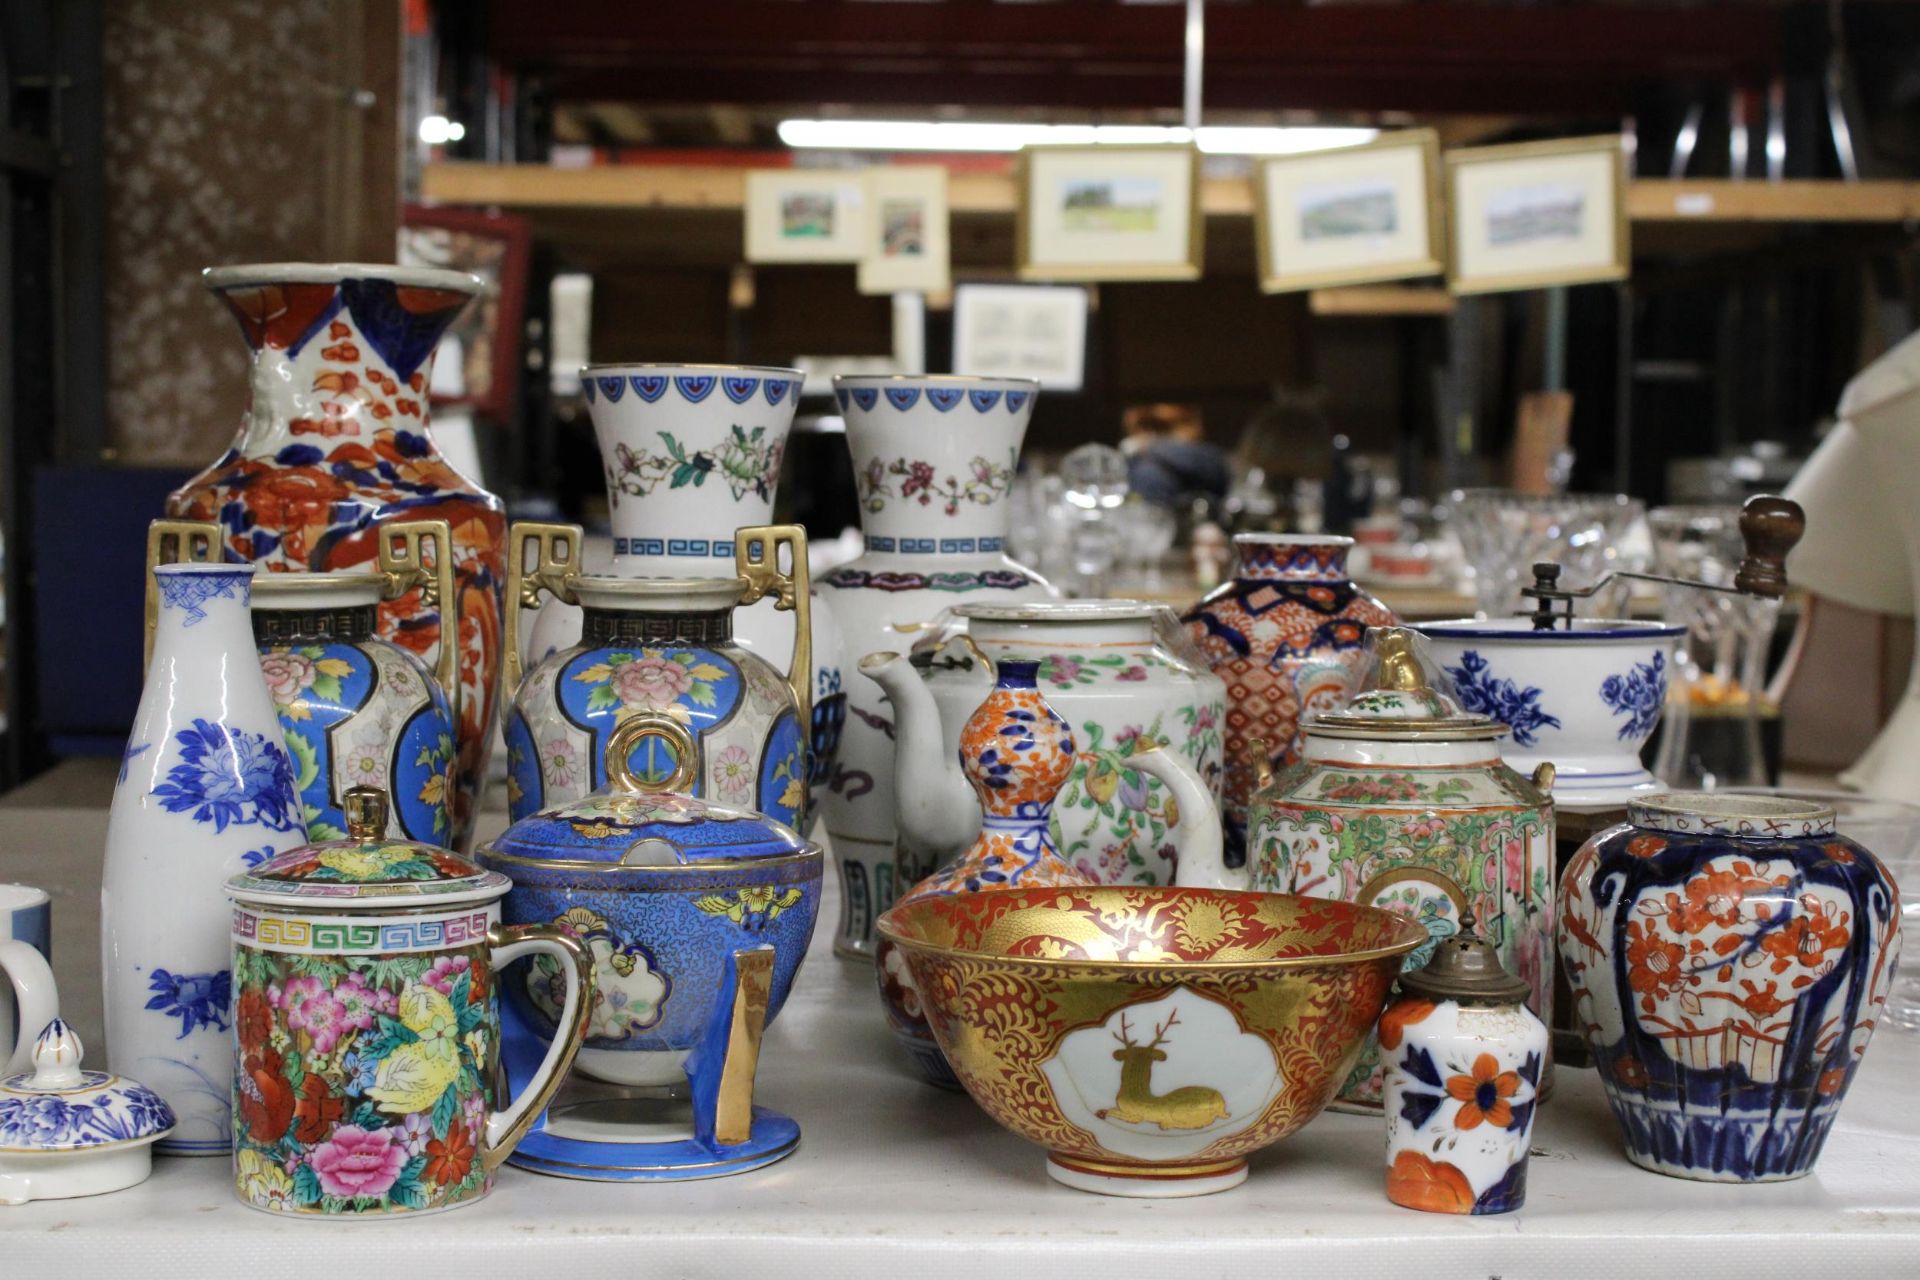 A LARGE QUANTITY OF CERAMICS TO INCLUDE ORIENTAL STYLE VASES AND TEAPOTS PLUS VINTAGE FRENCH